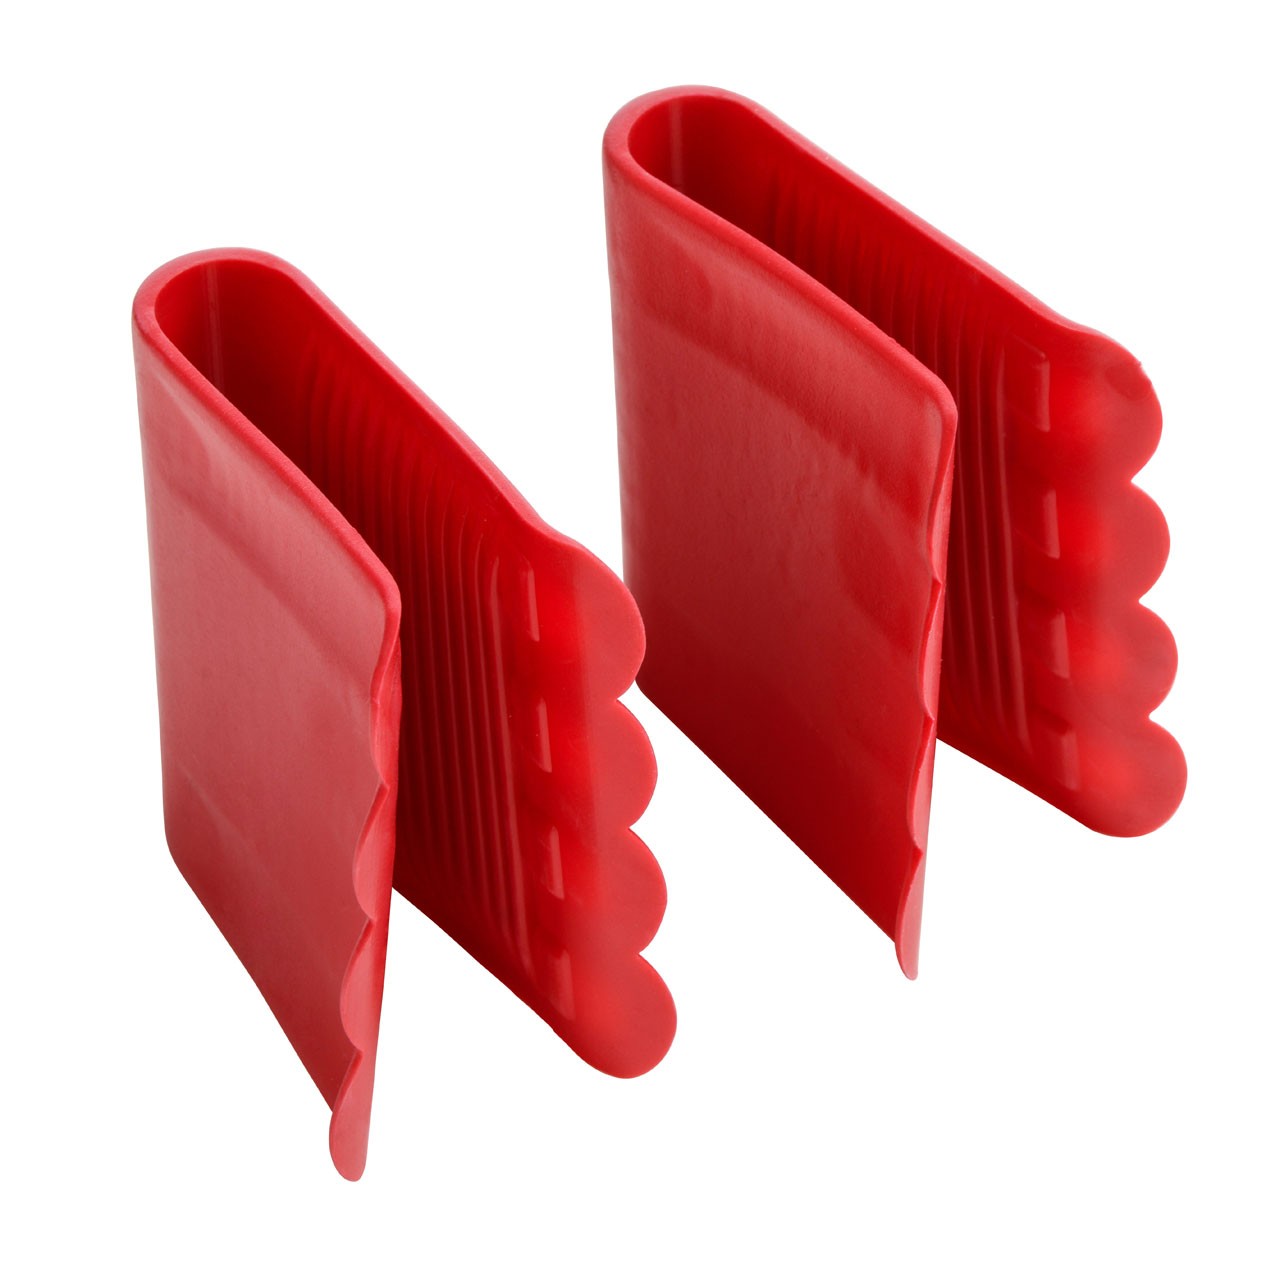 Anti Scald Grips - Red, Set of 2